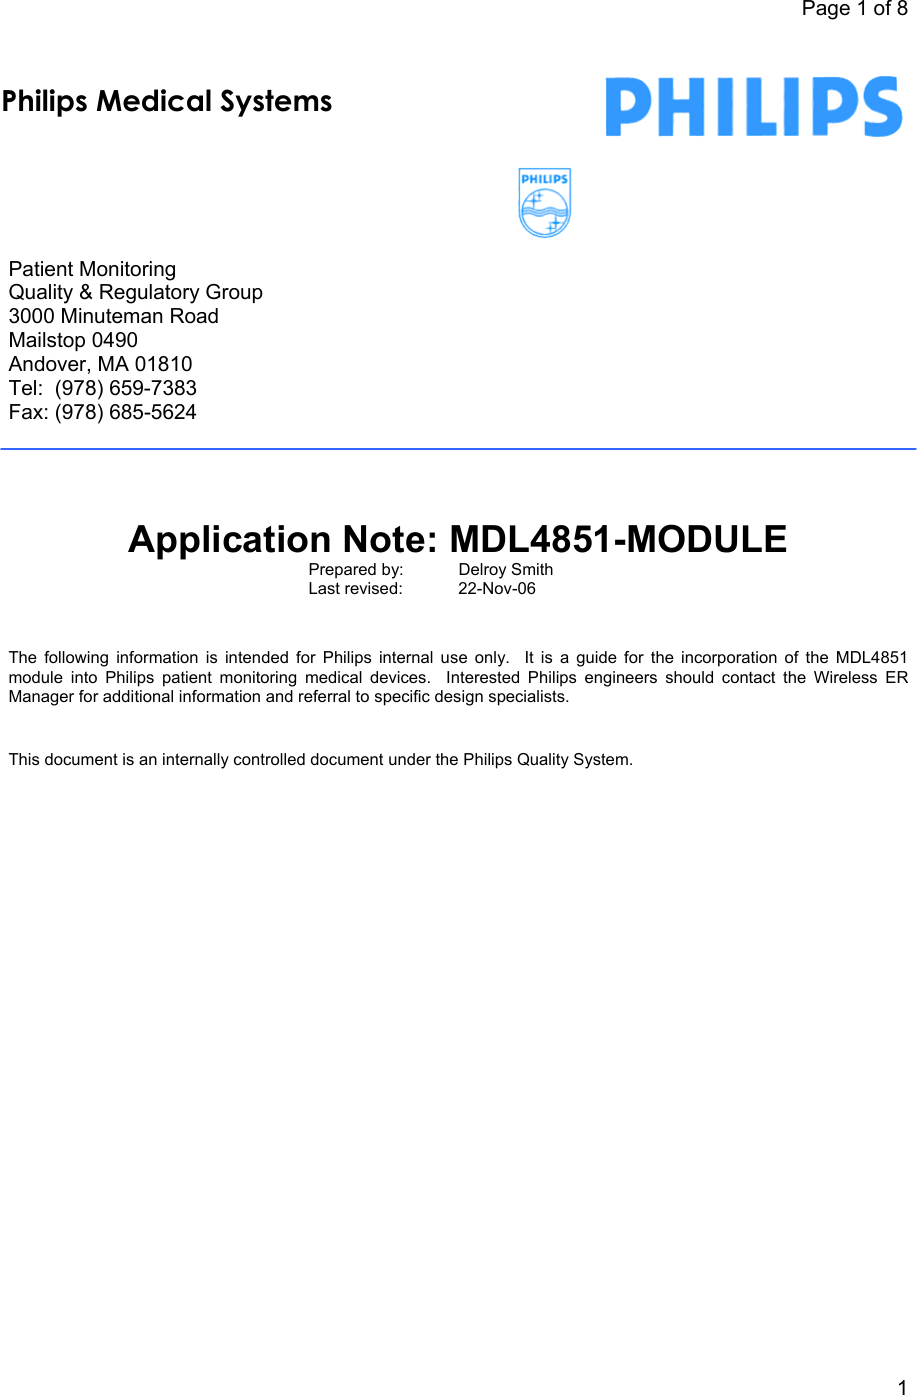 Page 1 of 8            1     Patient Monitoring Quality &amp; Regulatory Group 3000 Minuteman Road Mailstop 0490 Andover, MA 01810 Tel:  (978) 659-7383 Fax: (978) 685-5624       Application Note: MDL4851-MODULE Prepared by:    Delroy Smith Last revised:   22-Nov-06     The following information is intended for Philips internal use only.  It is a guide for the incorporation of the MDL4851 module into Philips patient monitoring medical devices.  Interested Philips engineers should contact the Wireless ER Manager for additional information and referral to specific design specialists.      This document is an internally controlled document under the Philips Quality System.   Philips Medical Systems